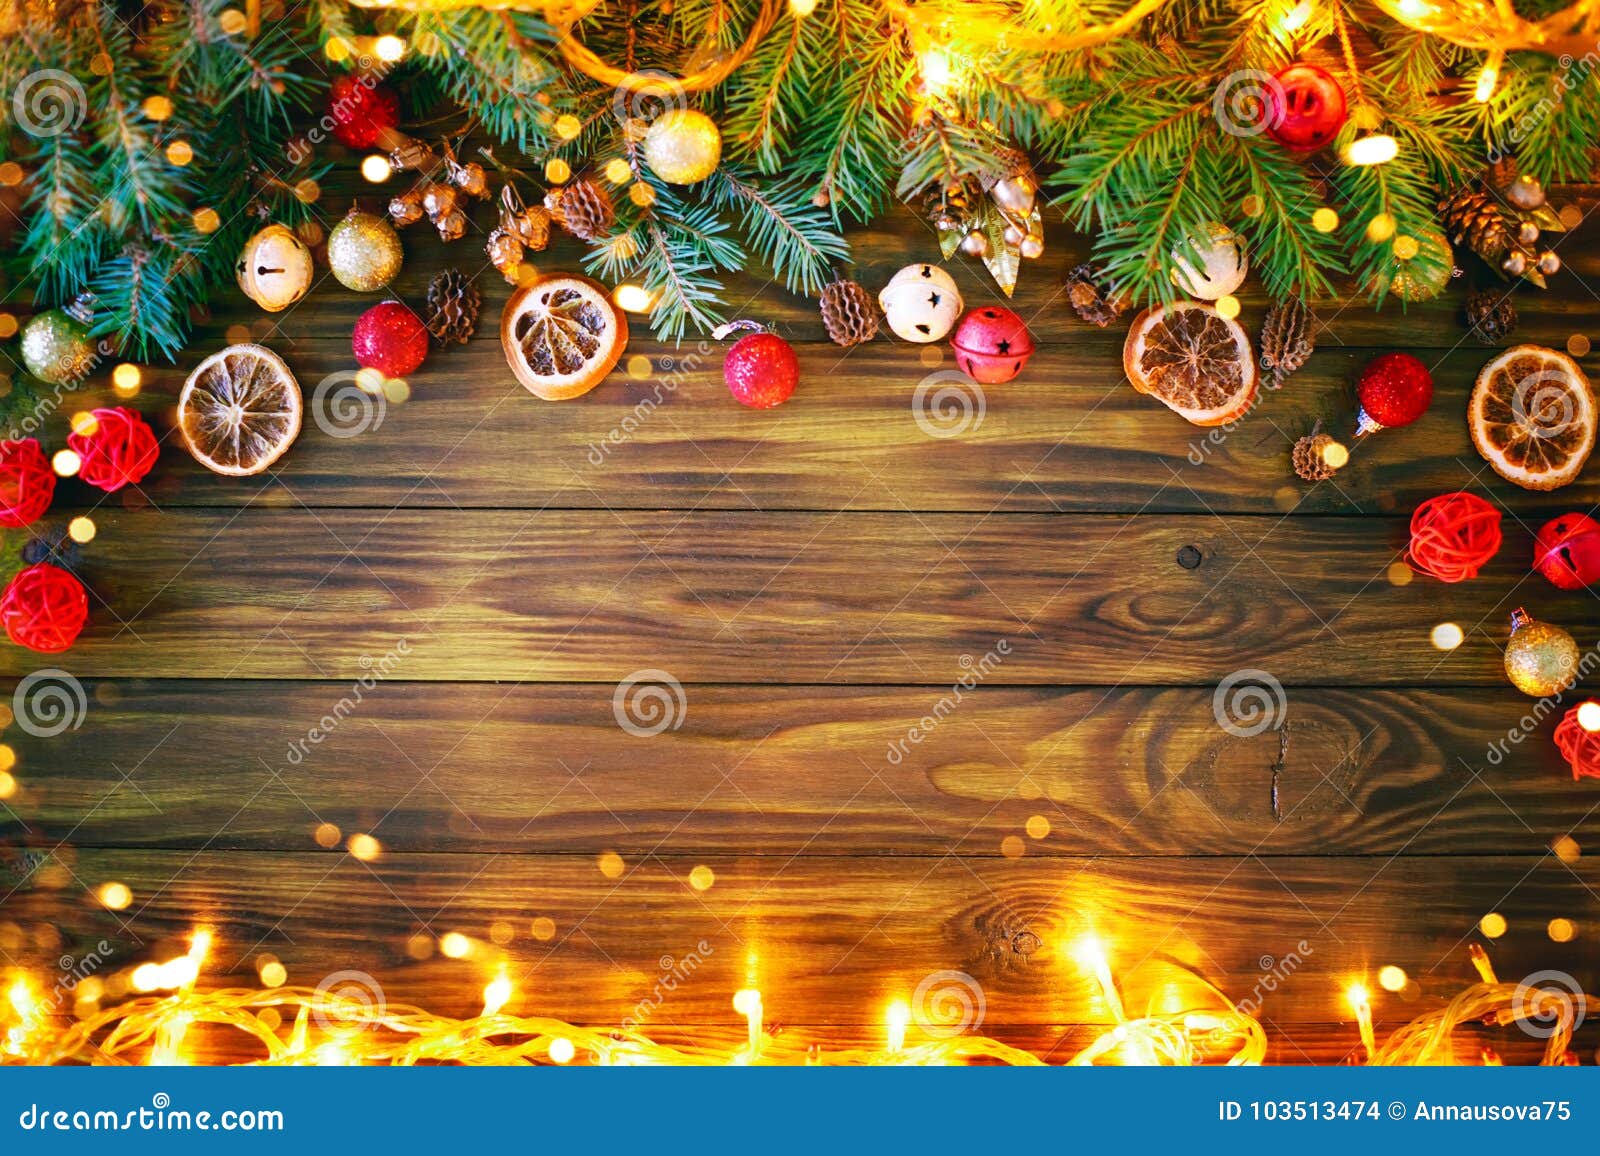 Christmas Winter Background, a Table Decorated with Fir Branches and ...